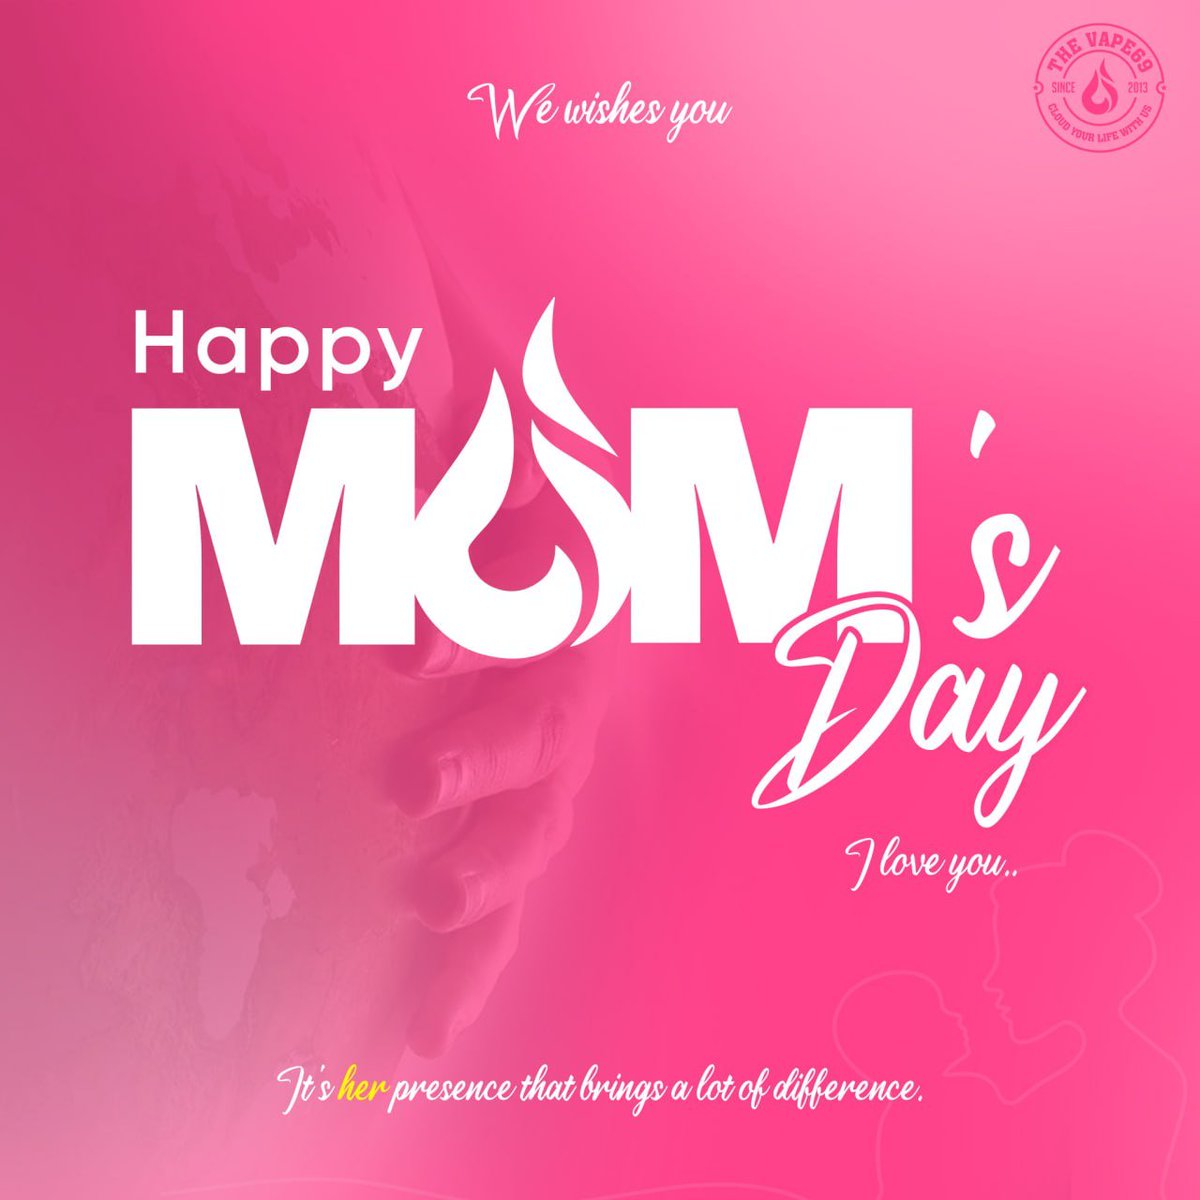 Here's to the guiding light in our lives, the epitome of love and strength - Happy Mother's Day to all the incredible moms! Your unwavering support and boundless love make every day brighter. 💐✨

#TheVape69 #TV69 #vape69 #HappyMothersDay #CelebrateMom